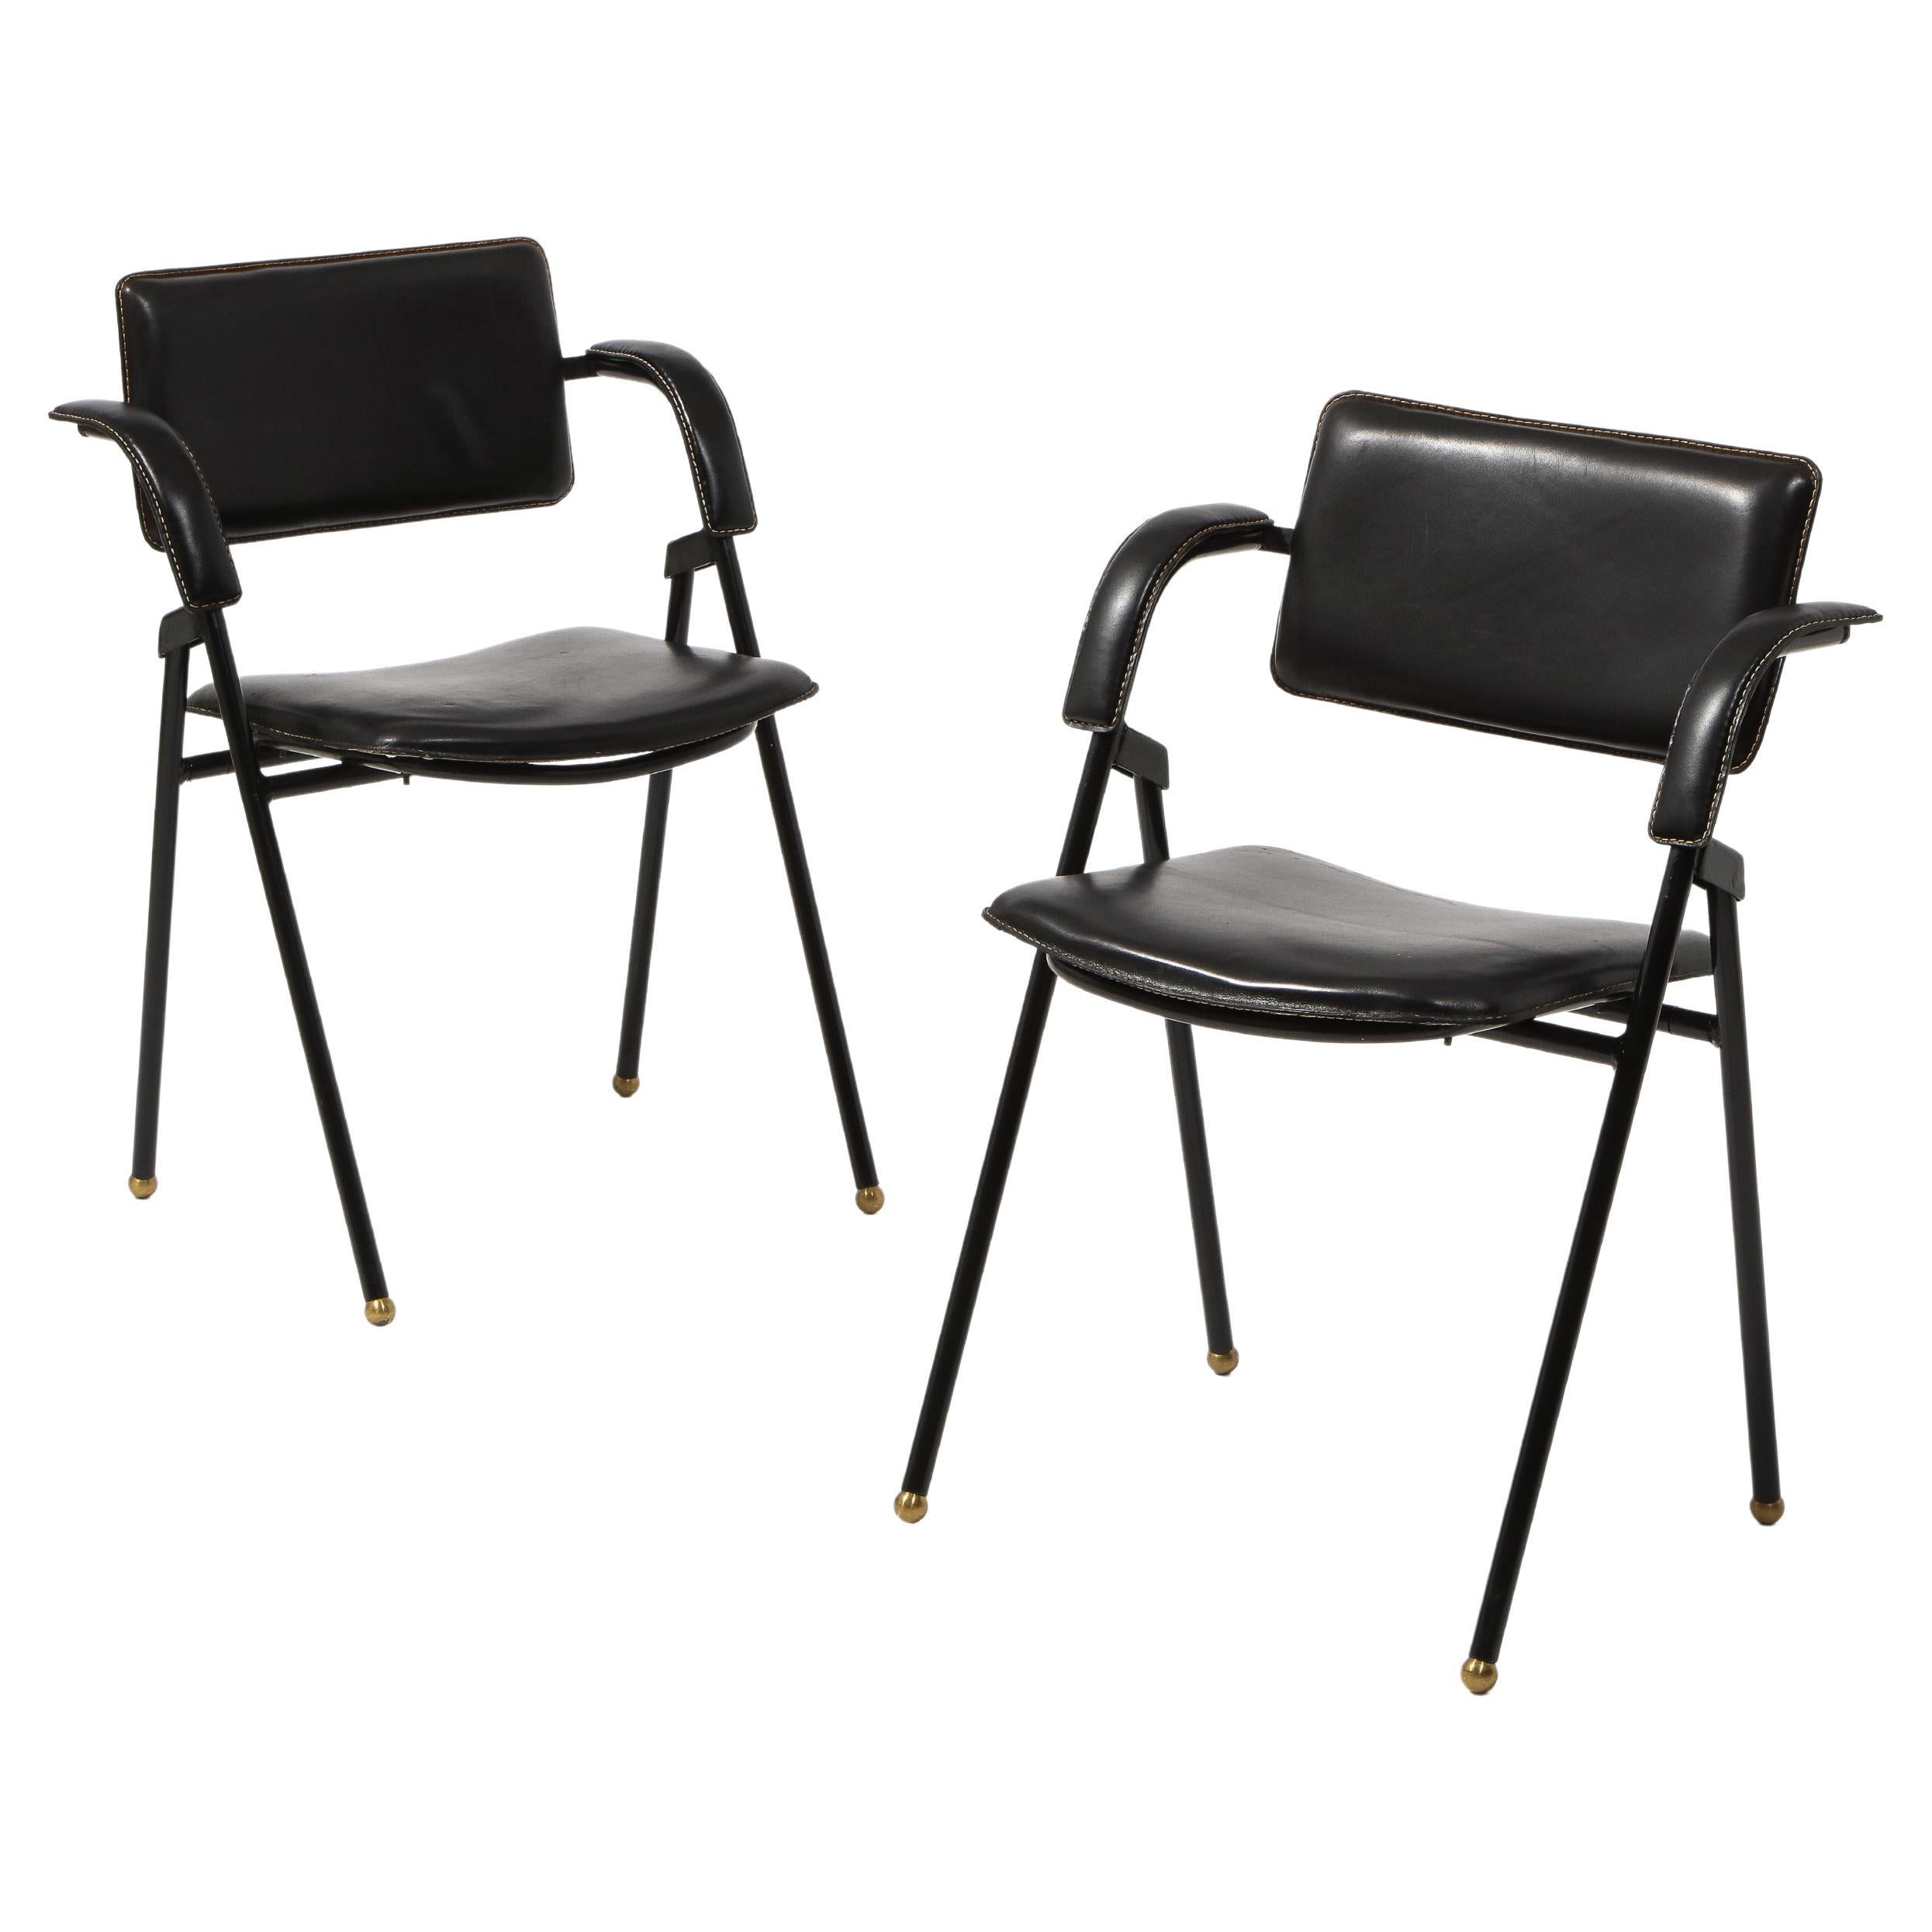 Jacques Adnet Pair of Folding Leather Chairs, France 1950's